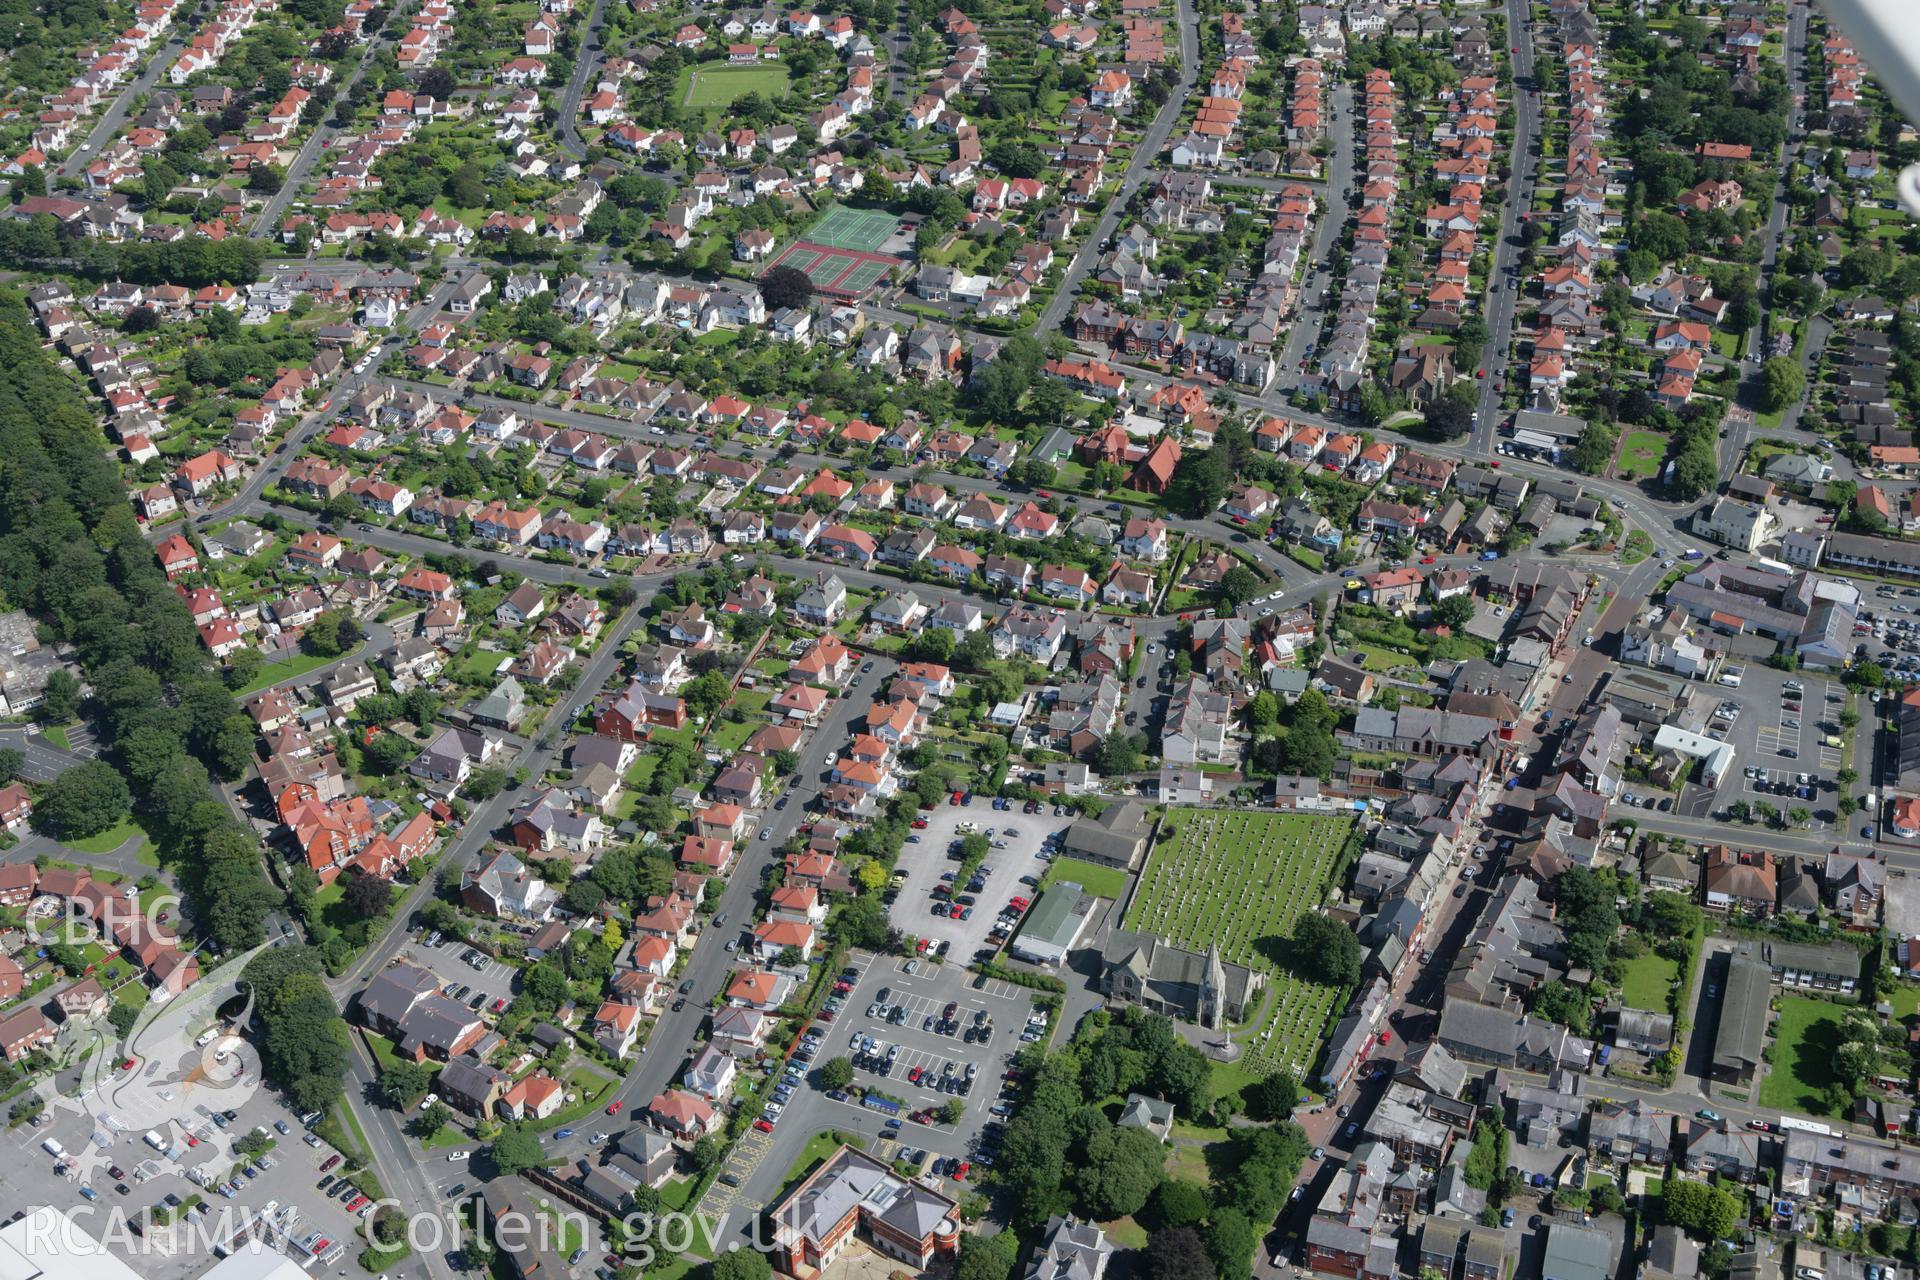 RCAHMW colour oblique aerial photograph of Prestatyn from the north-west. Taken on 31 July 2007 by Toby Driver